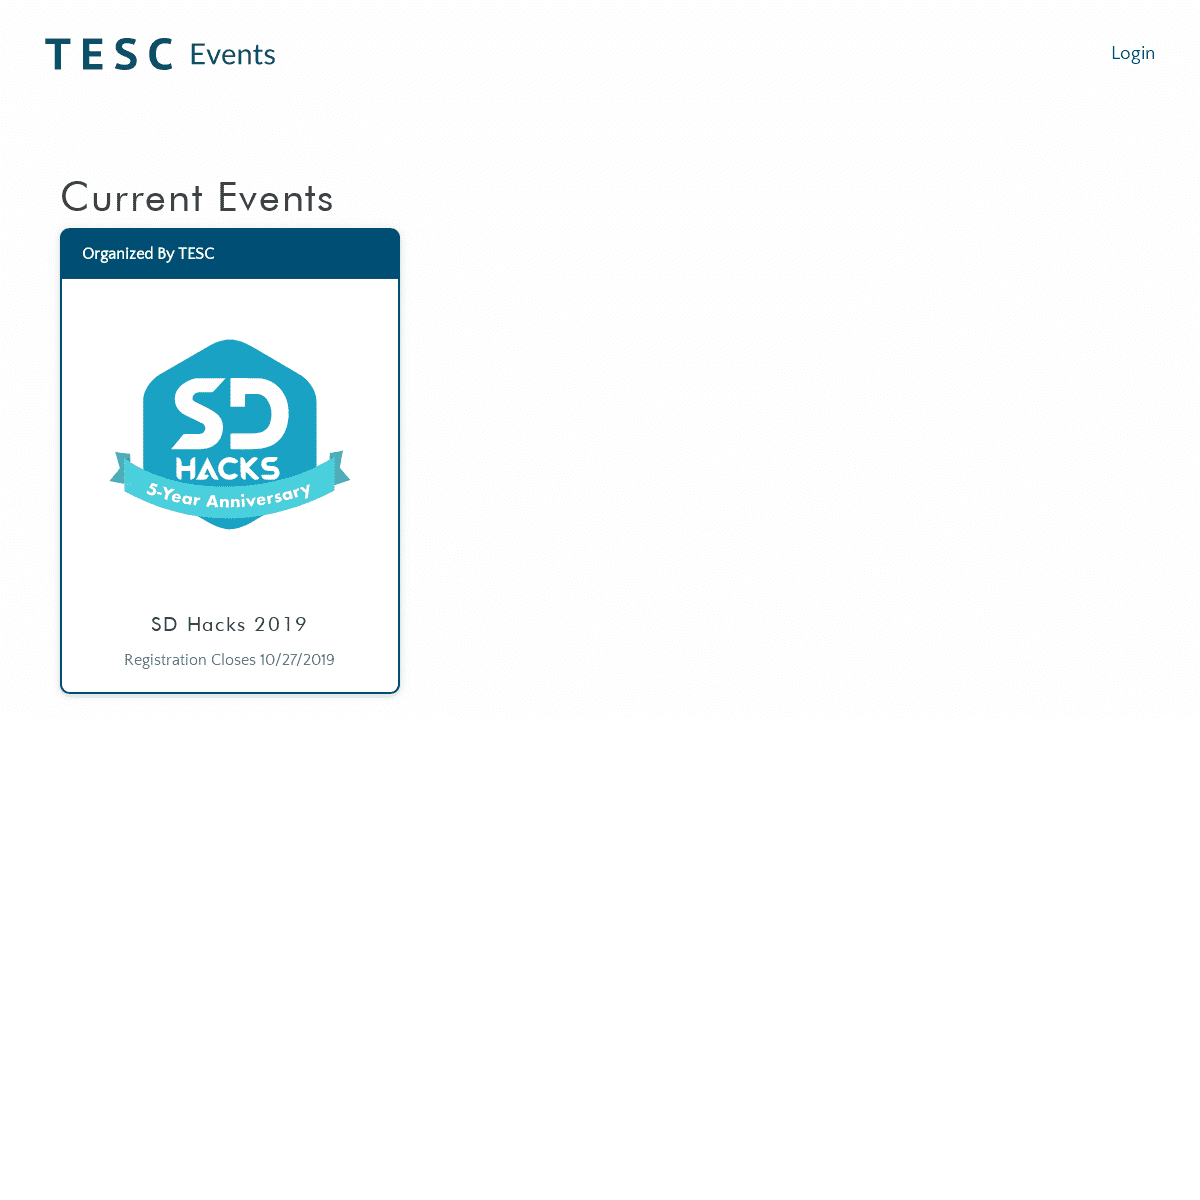 A complete backup of tesc.events